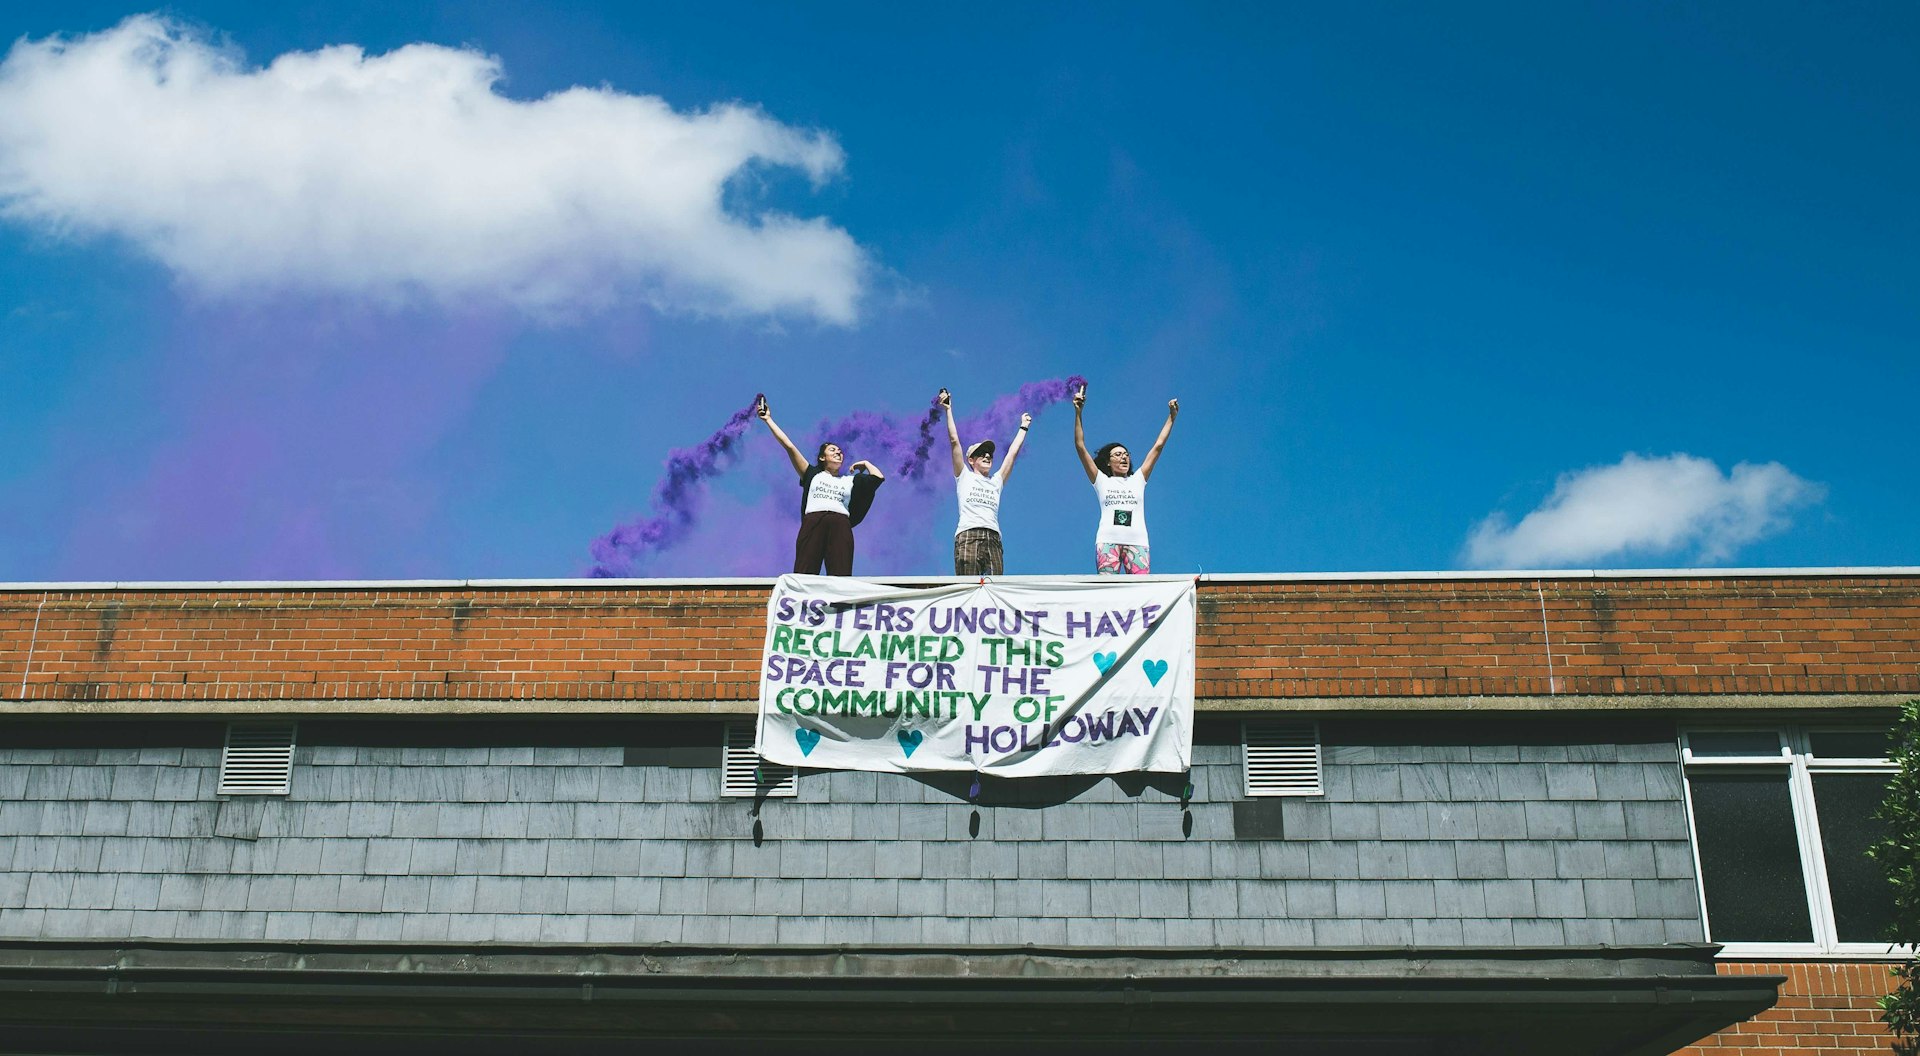 Activists from Sisters Uncut have occupied a London women's prison